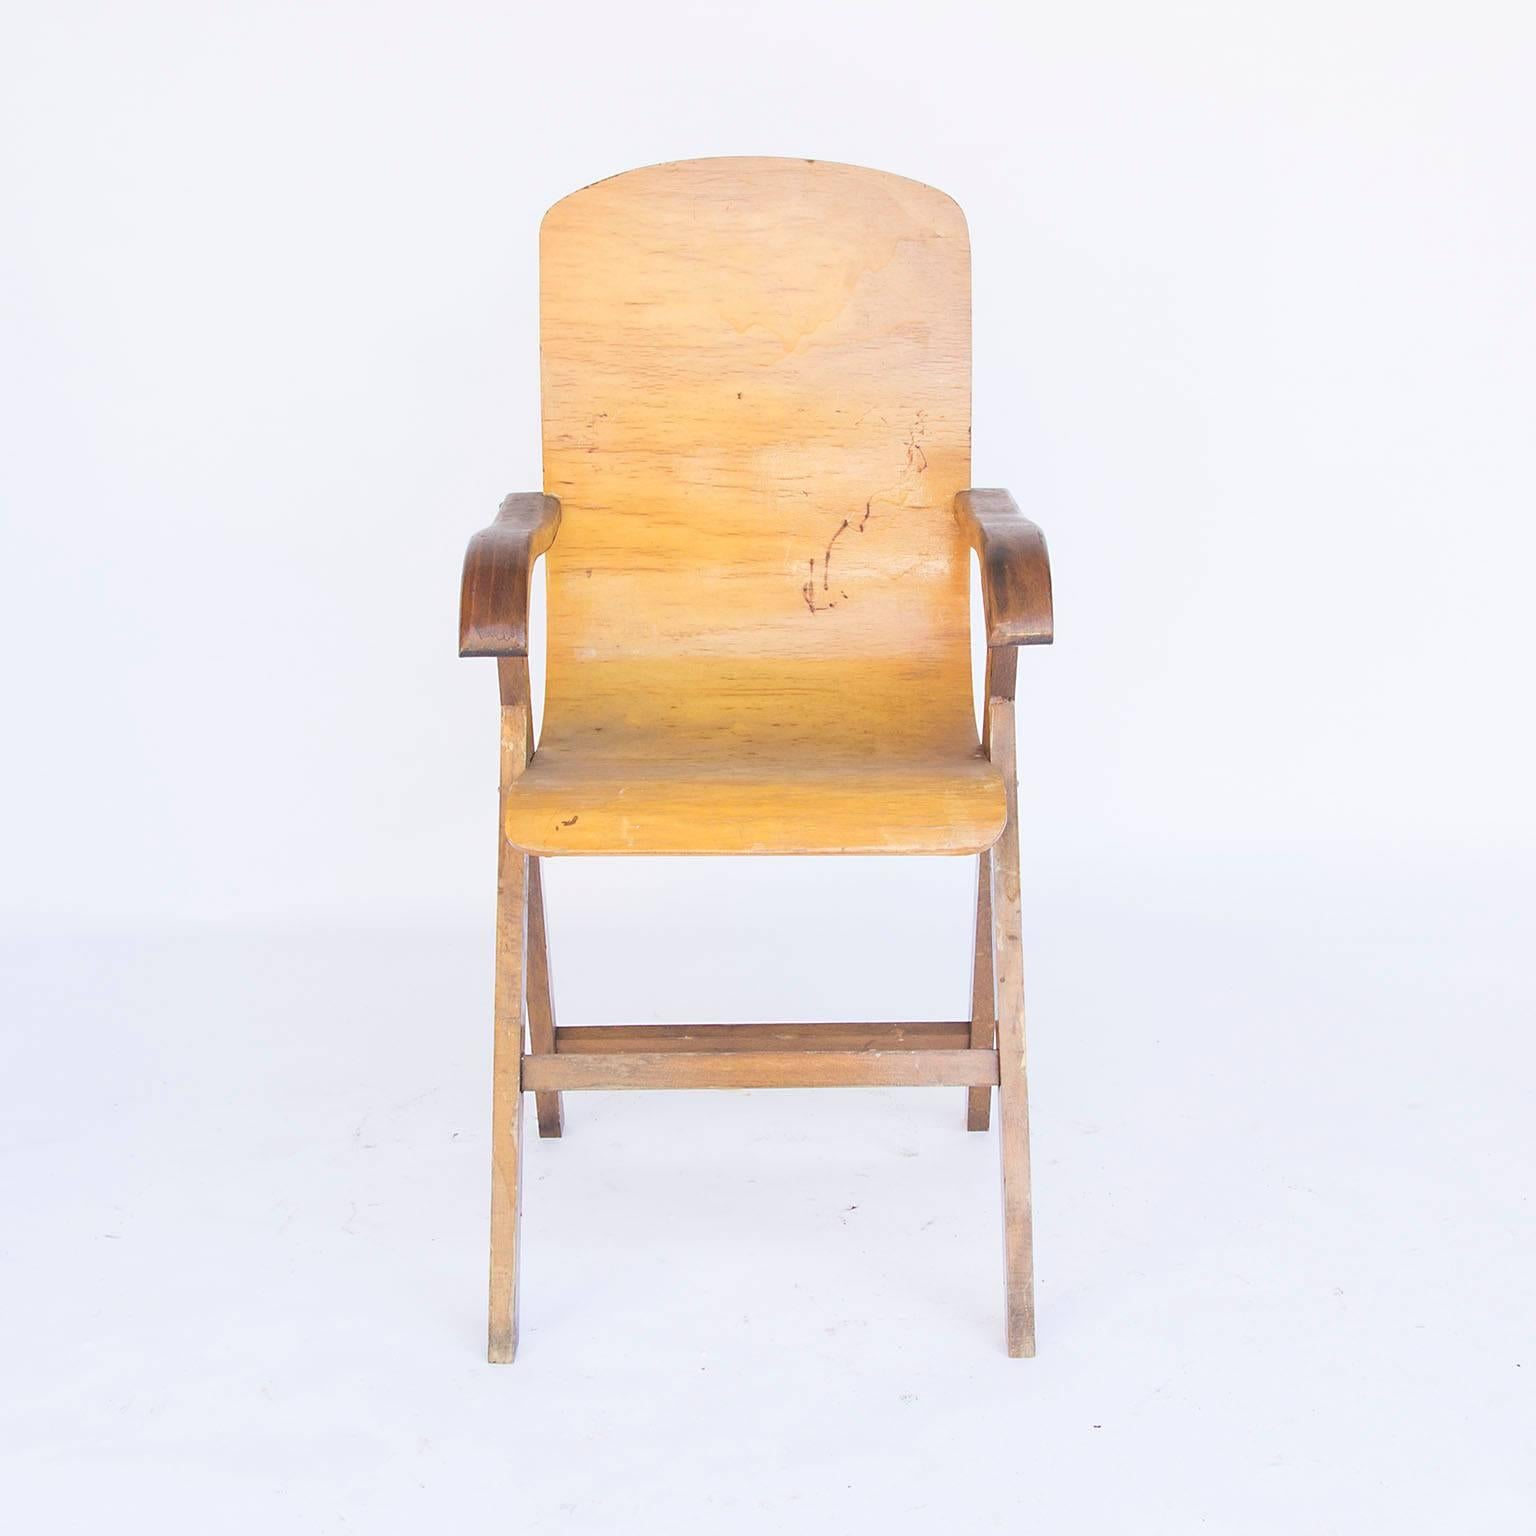 Circa 1950, European Plywood Chair  In Good Condition For Sale In Amsterdam IJMuiden, NL